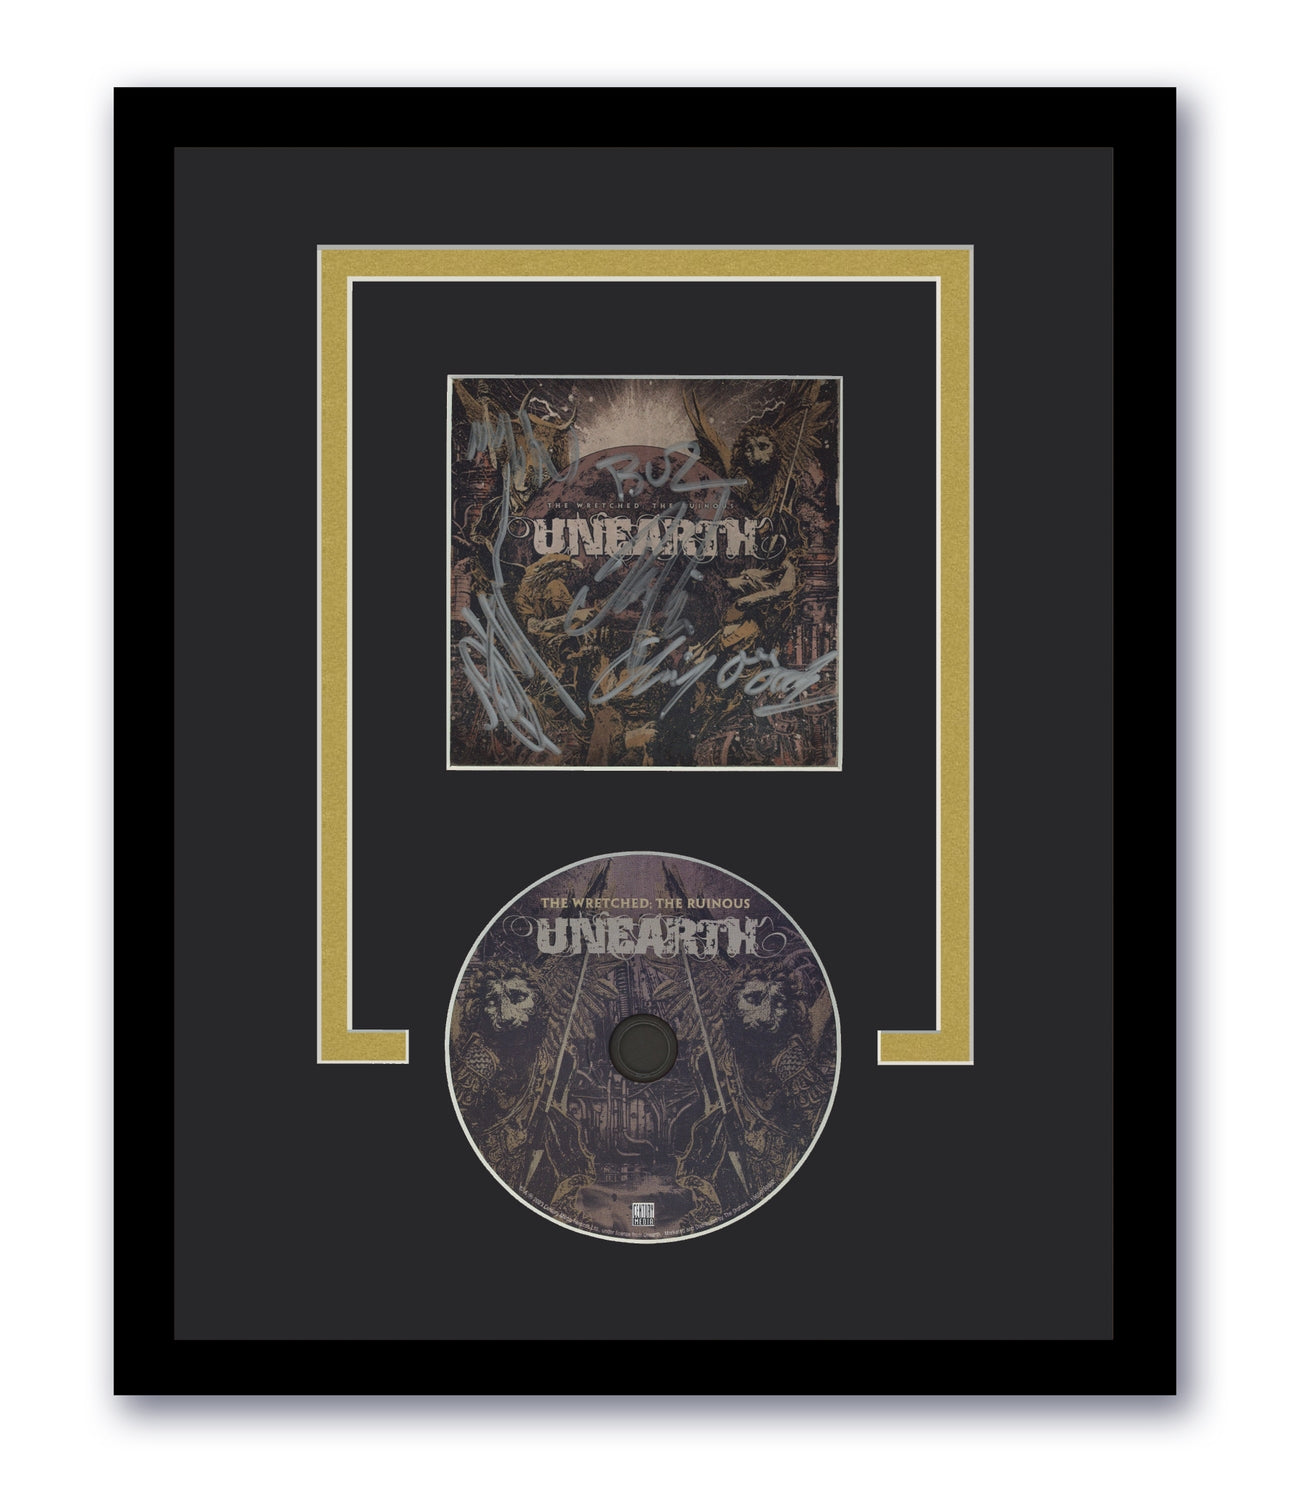 Unearth Signed 11x14 Framed CD The Wretched The Ruinous Autographed ACOA 2